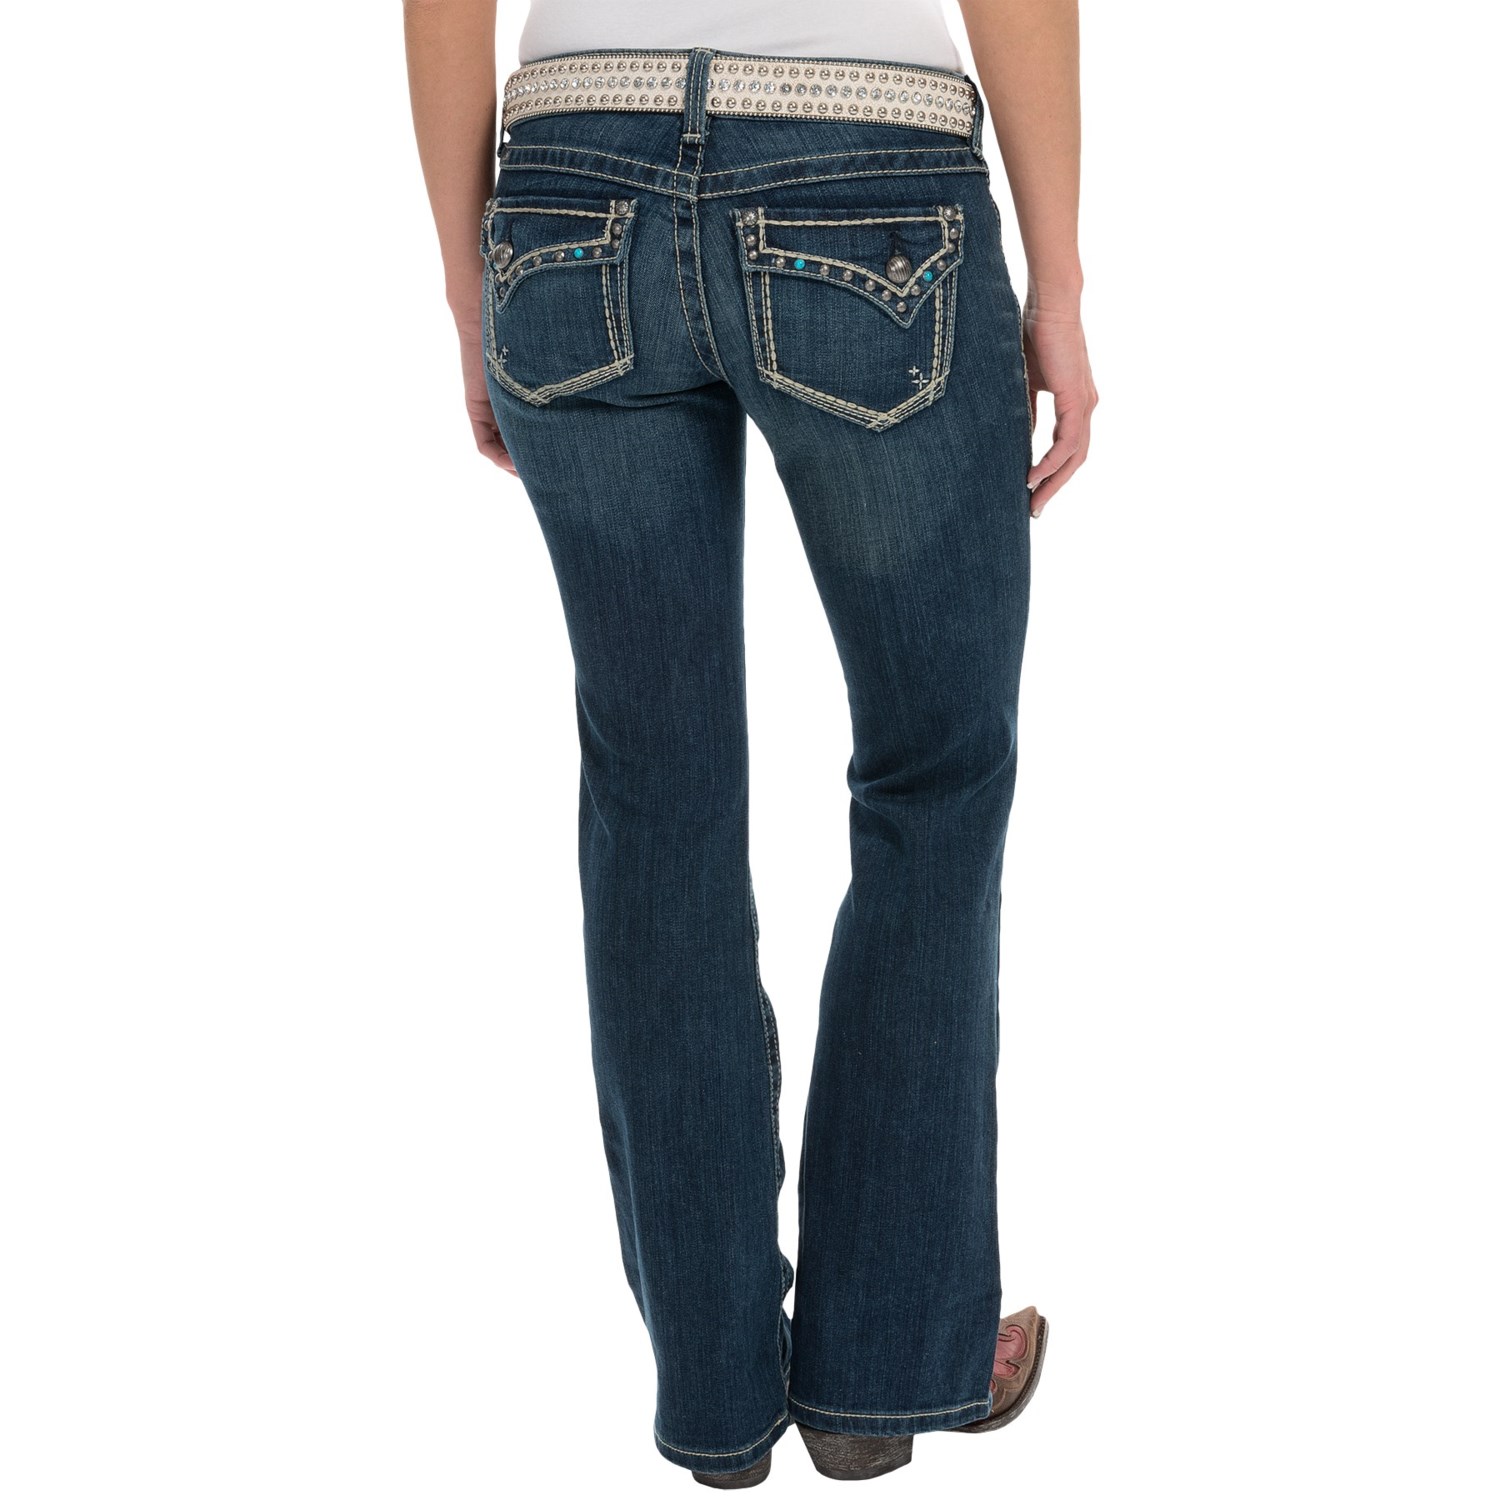 Ariat Turquoise Silversmith Jeans (For Women) 124KM - Save 72%